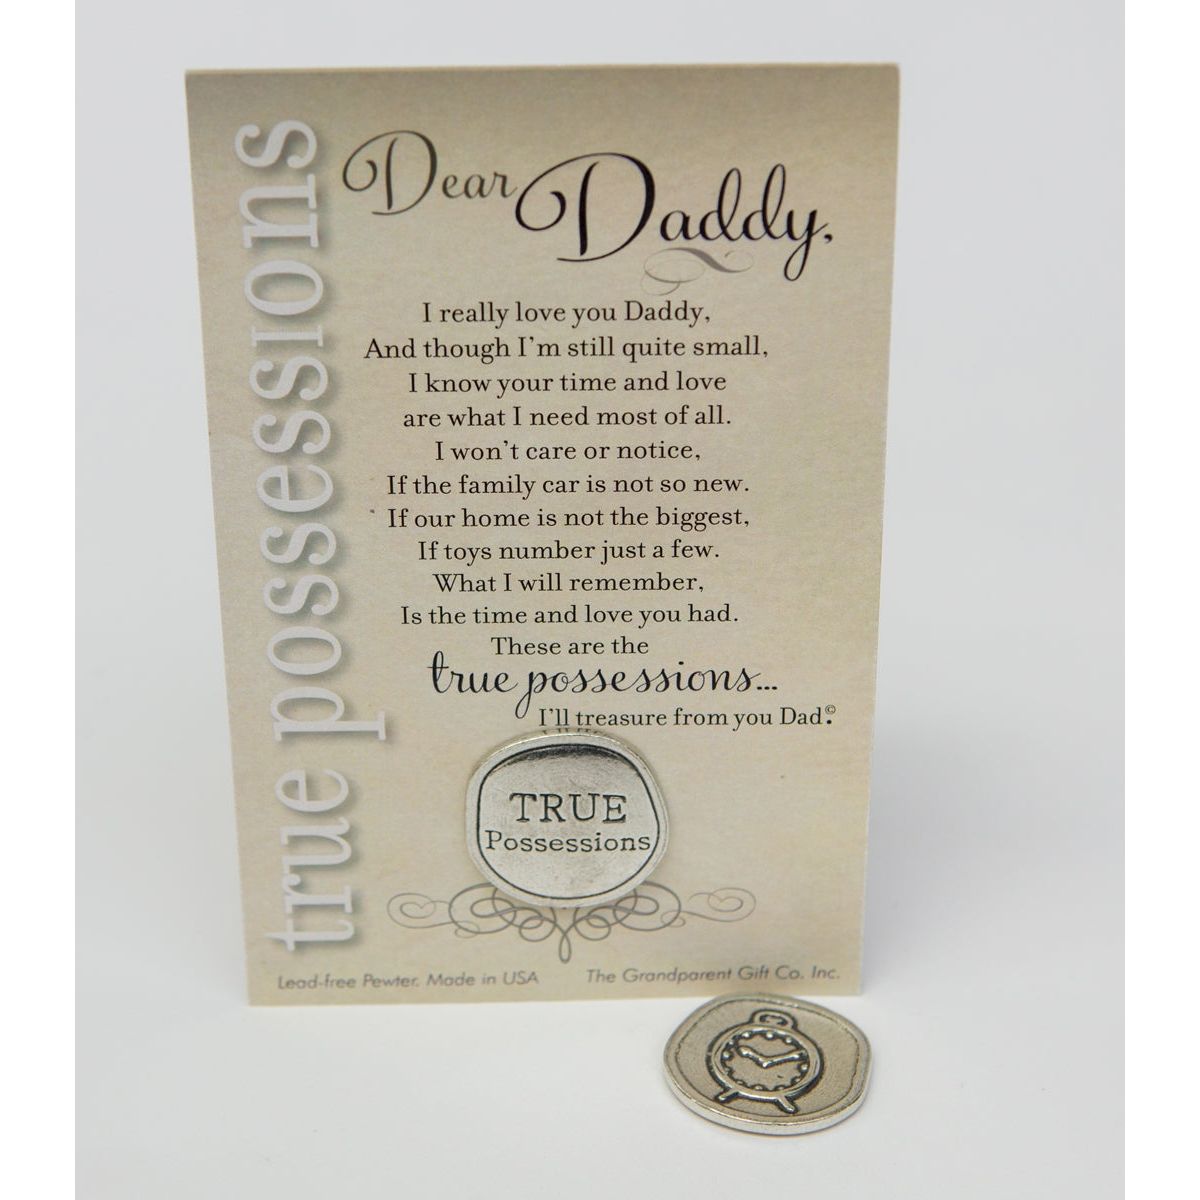 Gift for Dad: Handmade pewter coin with &quot;TRUE Possessions&quot; on one side and a clock on the other, packaged in a clear bag with &quot;Dear Daddy&quot; poem.